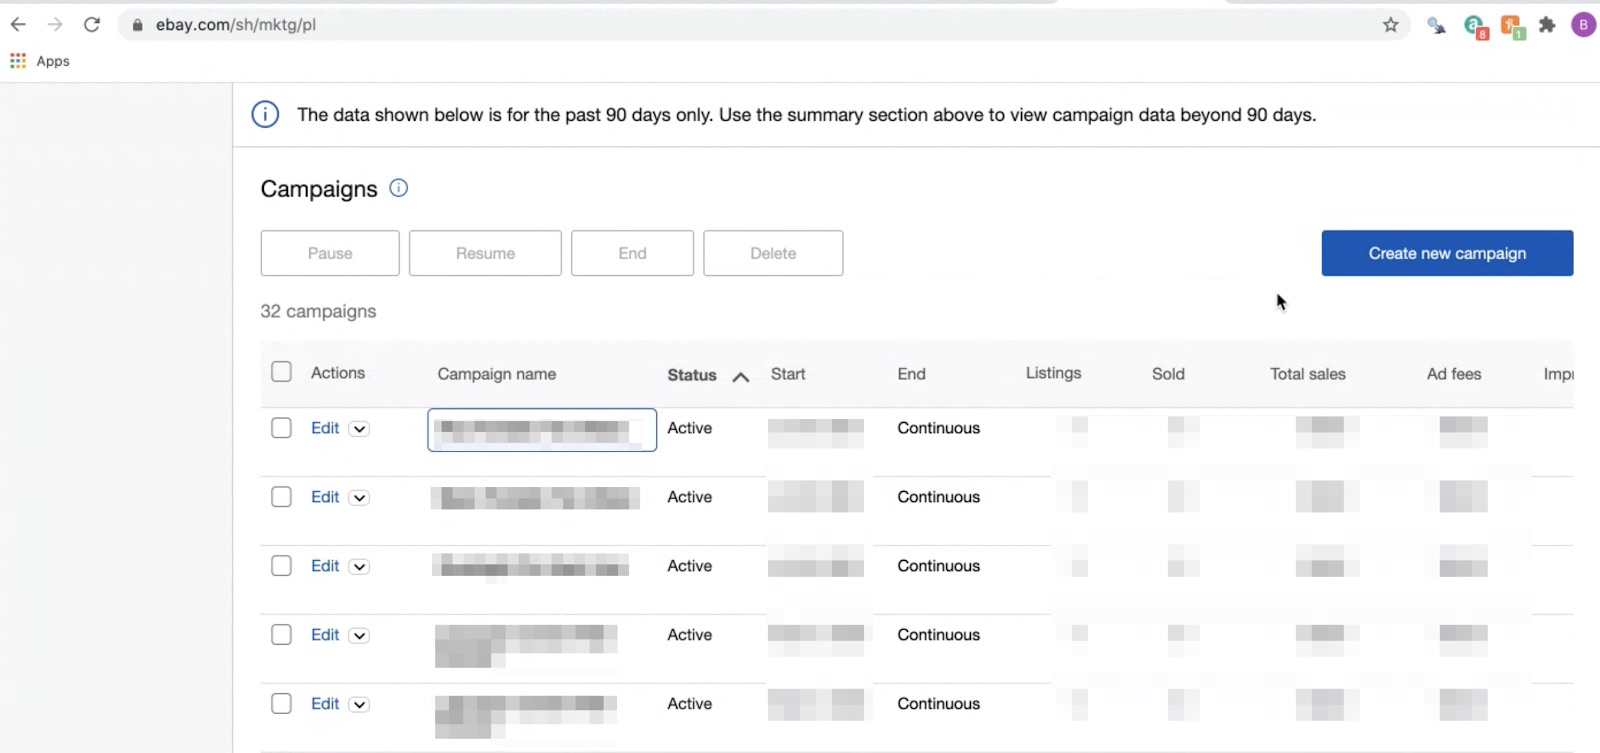 eBay Advertising Promoted Listings Campaign Reporting Tool | Pattern